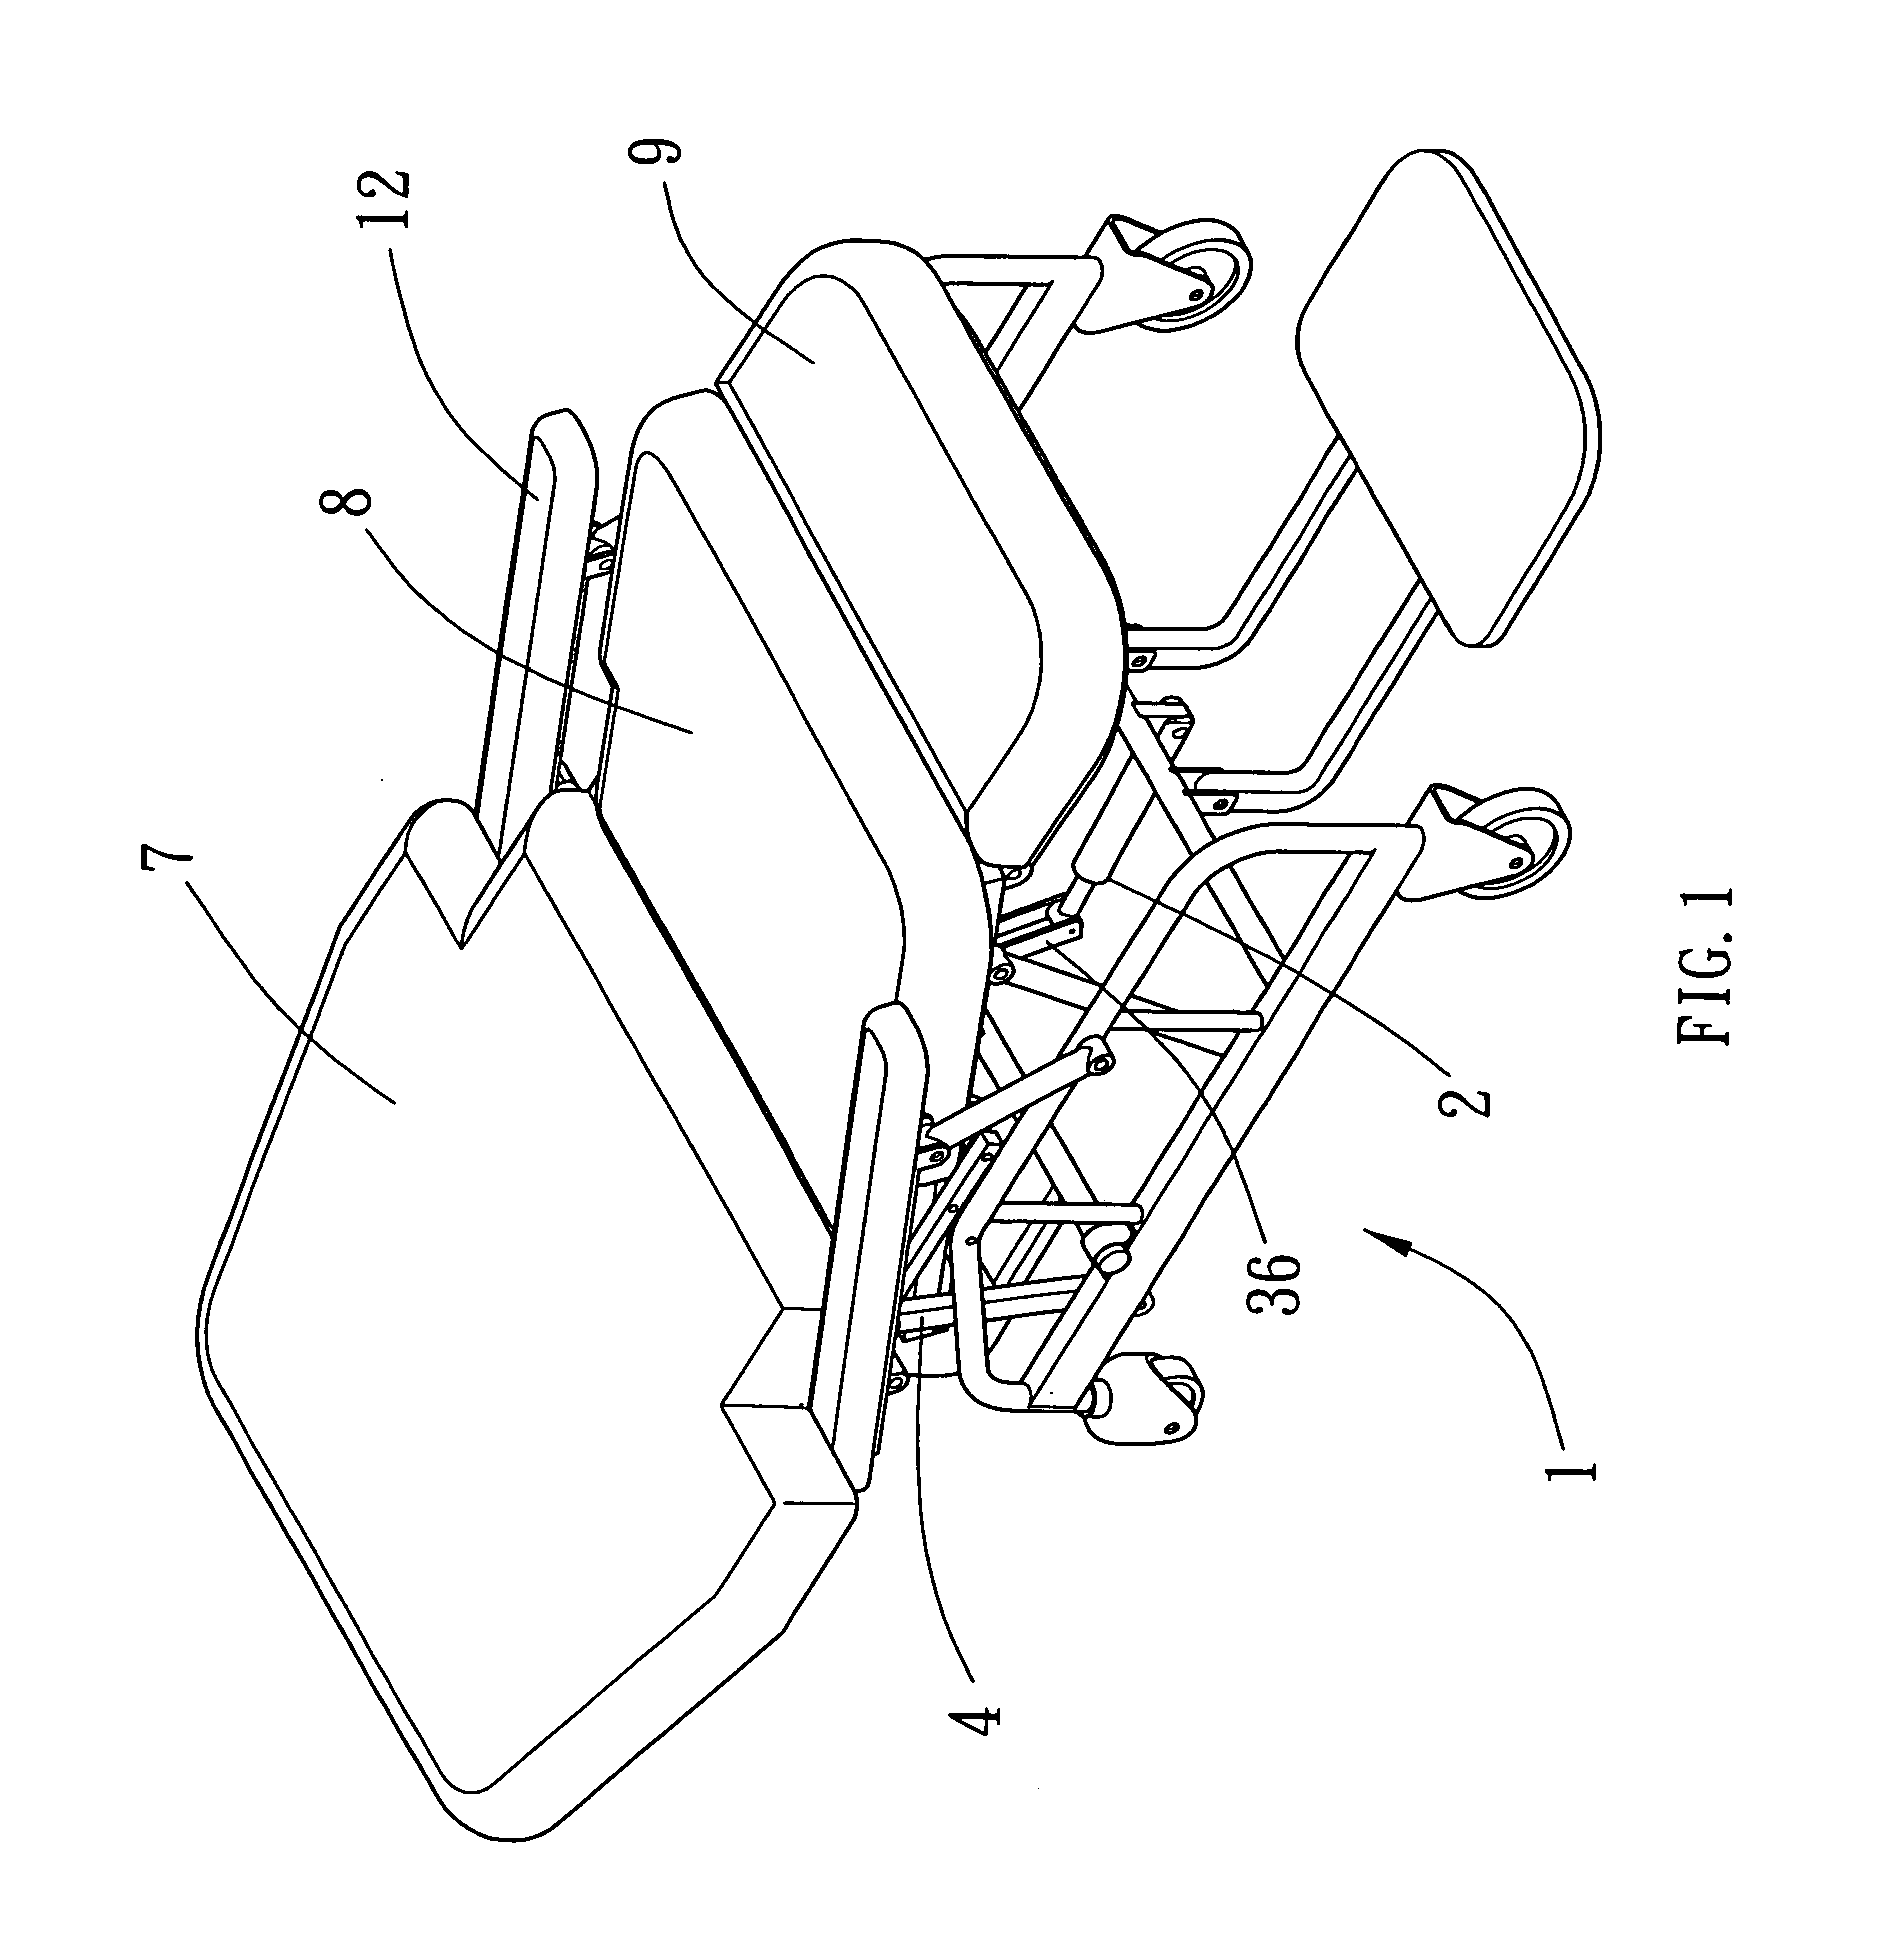 Medical chair having synchronously adjusting function